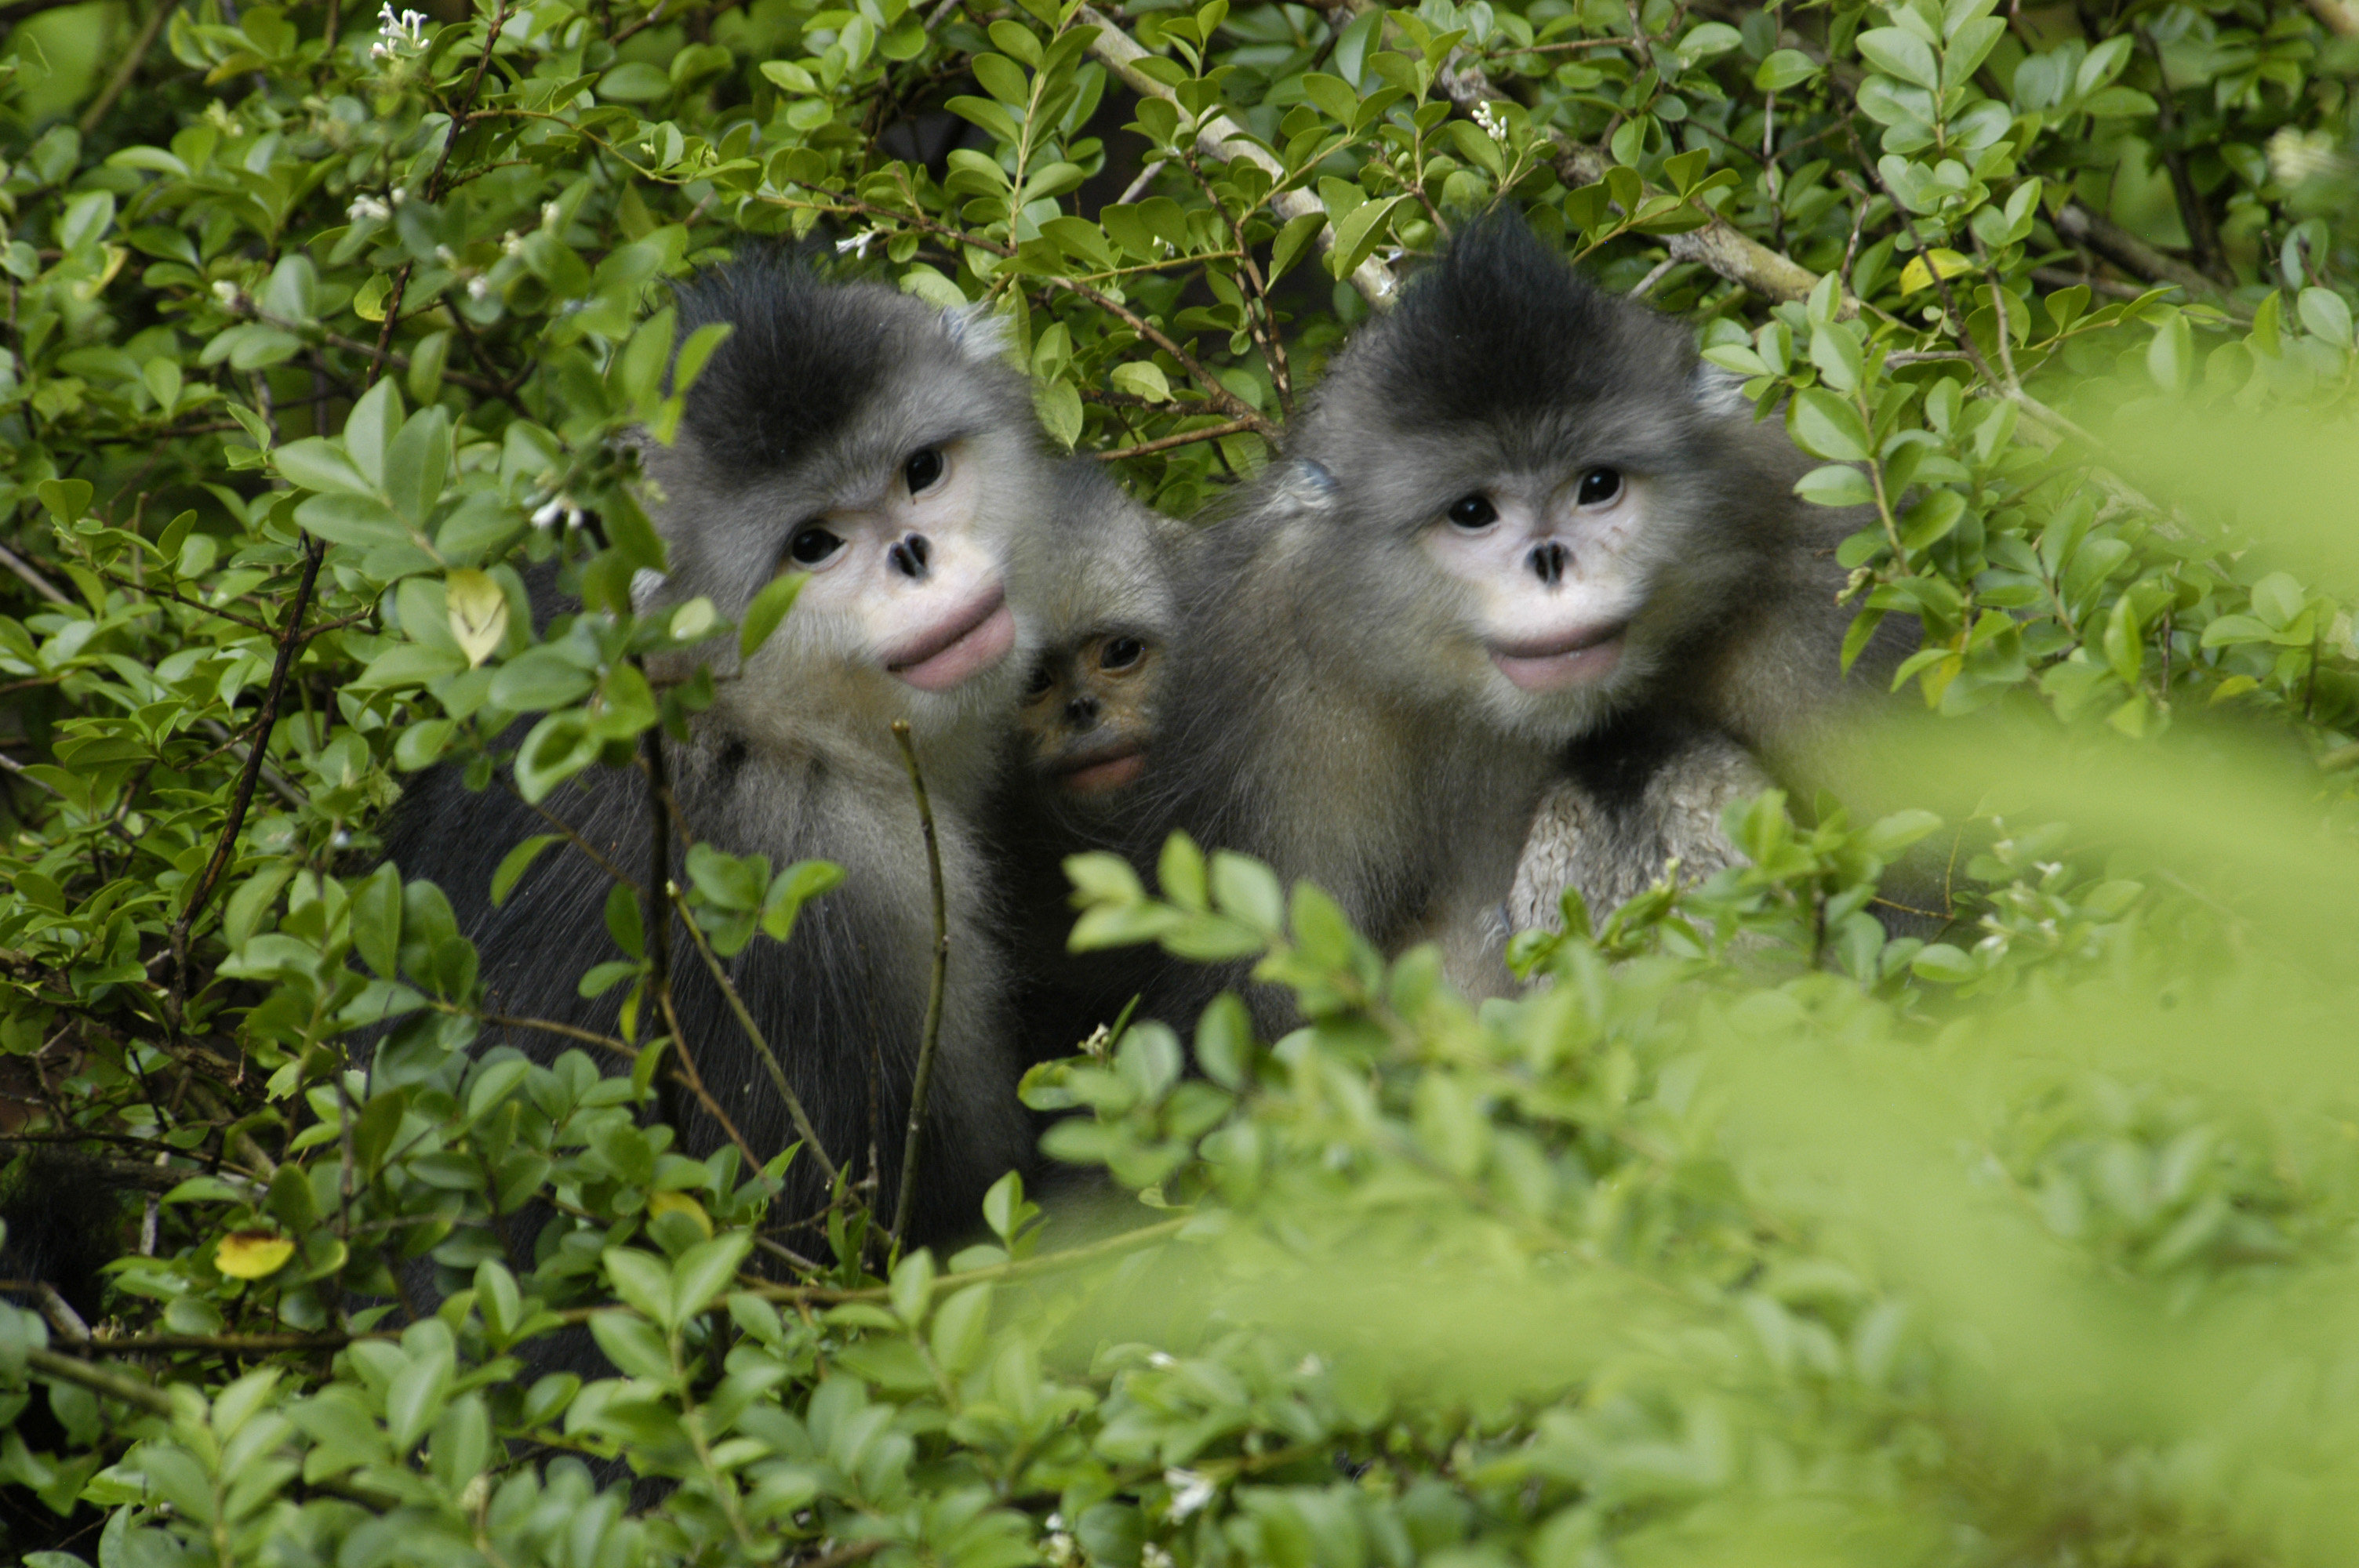 3 small black and white monkeys with flat noses peer out of green shrubbery